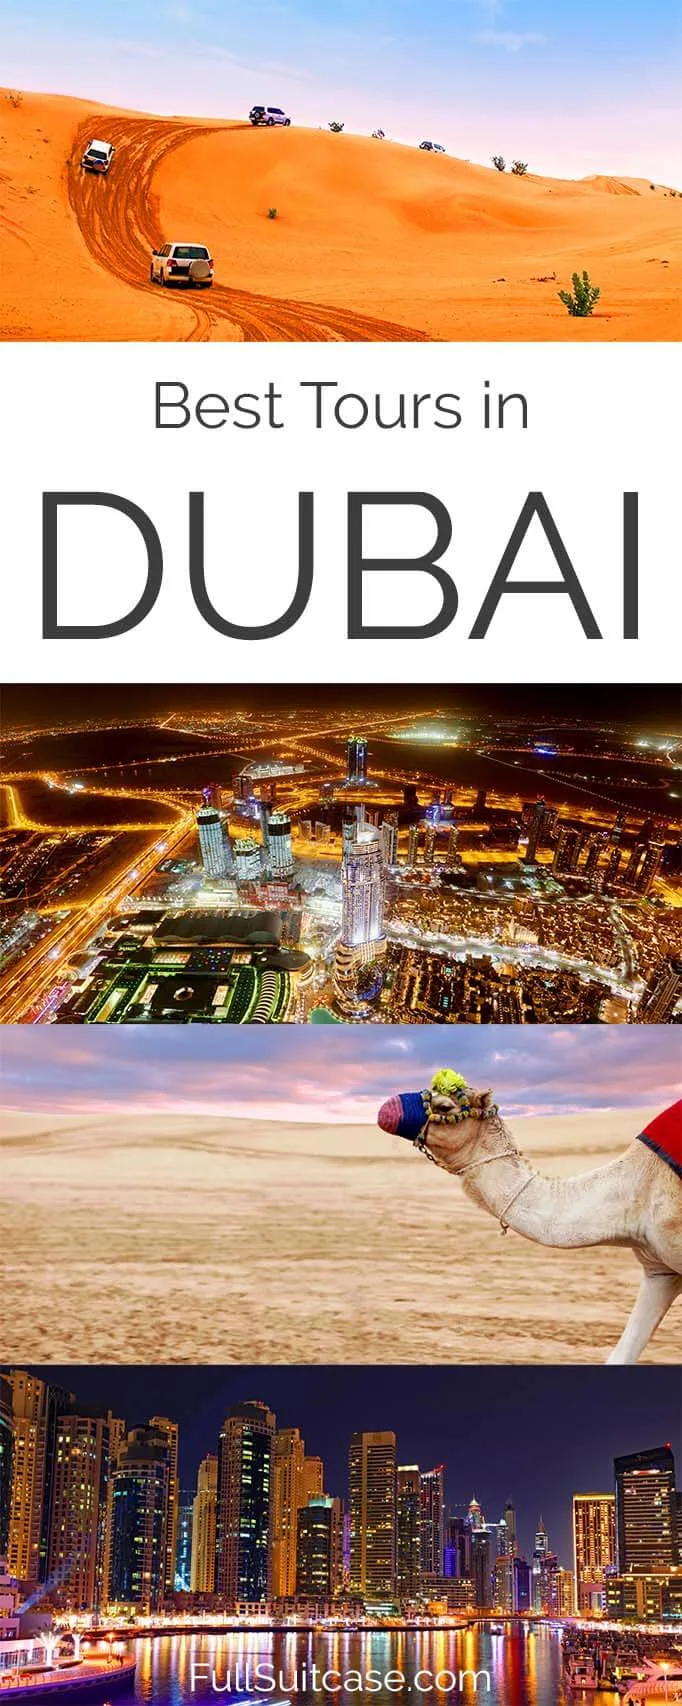 Best excursions, tours, and day trips in Dubai UAE